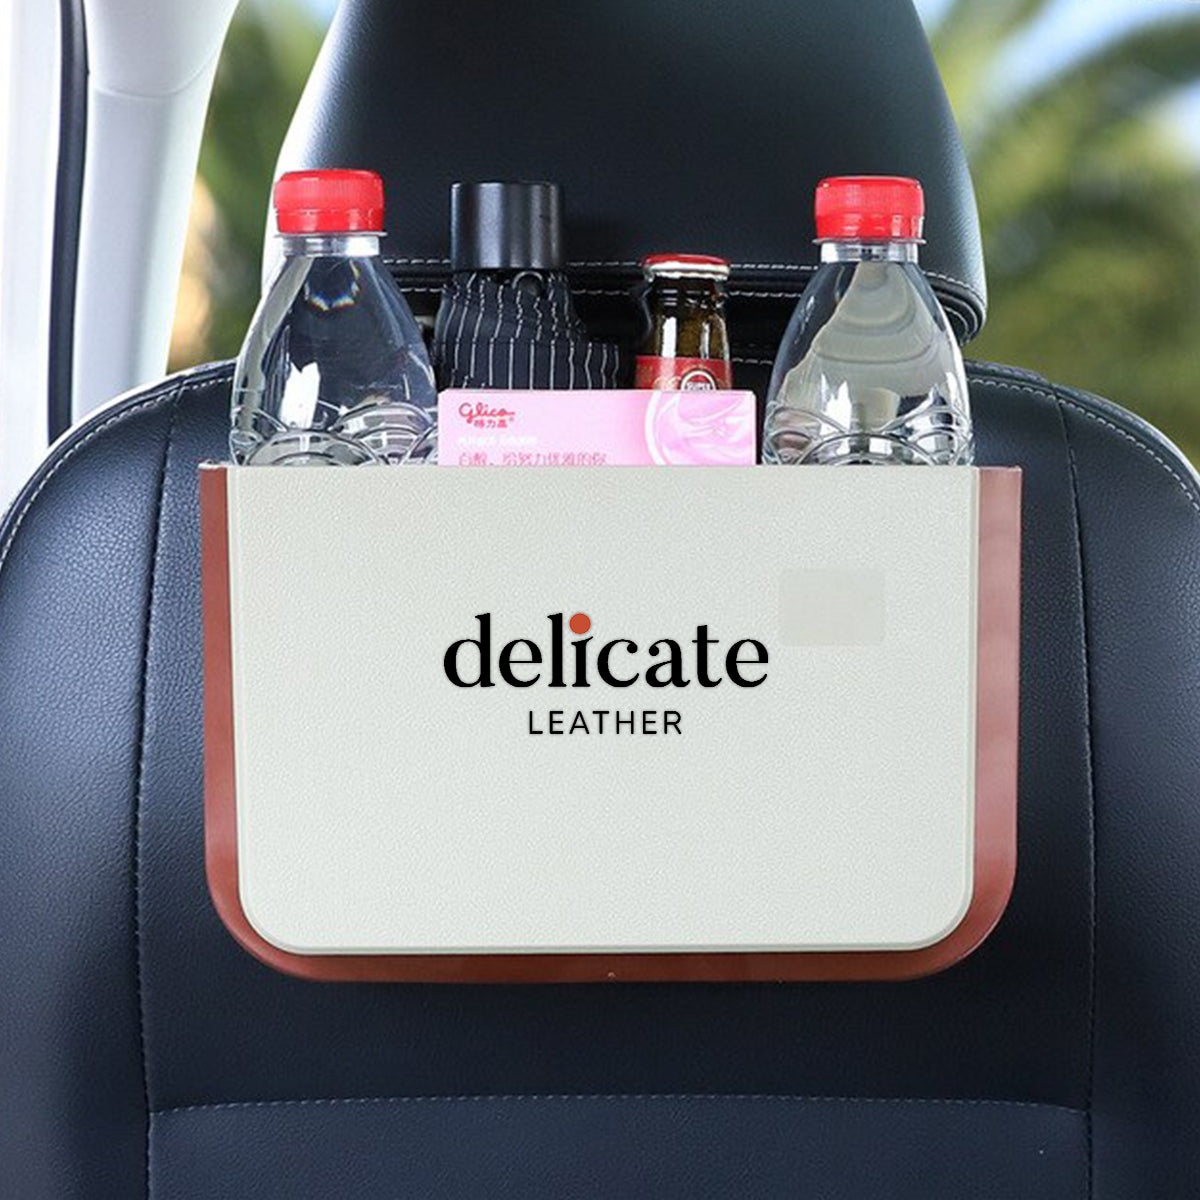 Delicate Leather Hanging Waterproof Car Trash can-Foldable, Custom For Your Cars, Waterproof, and Equipped with Cup Holders and Trays. Multi-Purpose, Car Accessories LM11992 - Delicate Leather